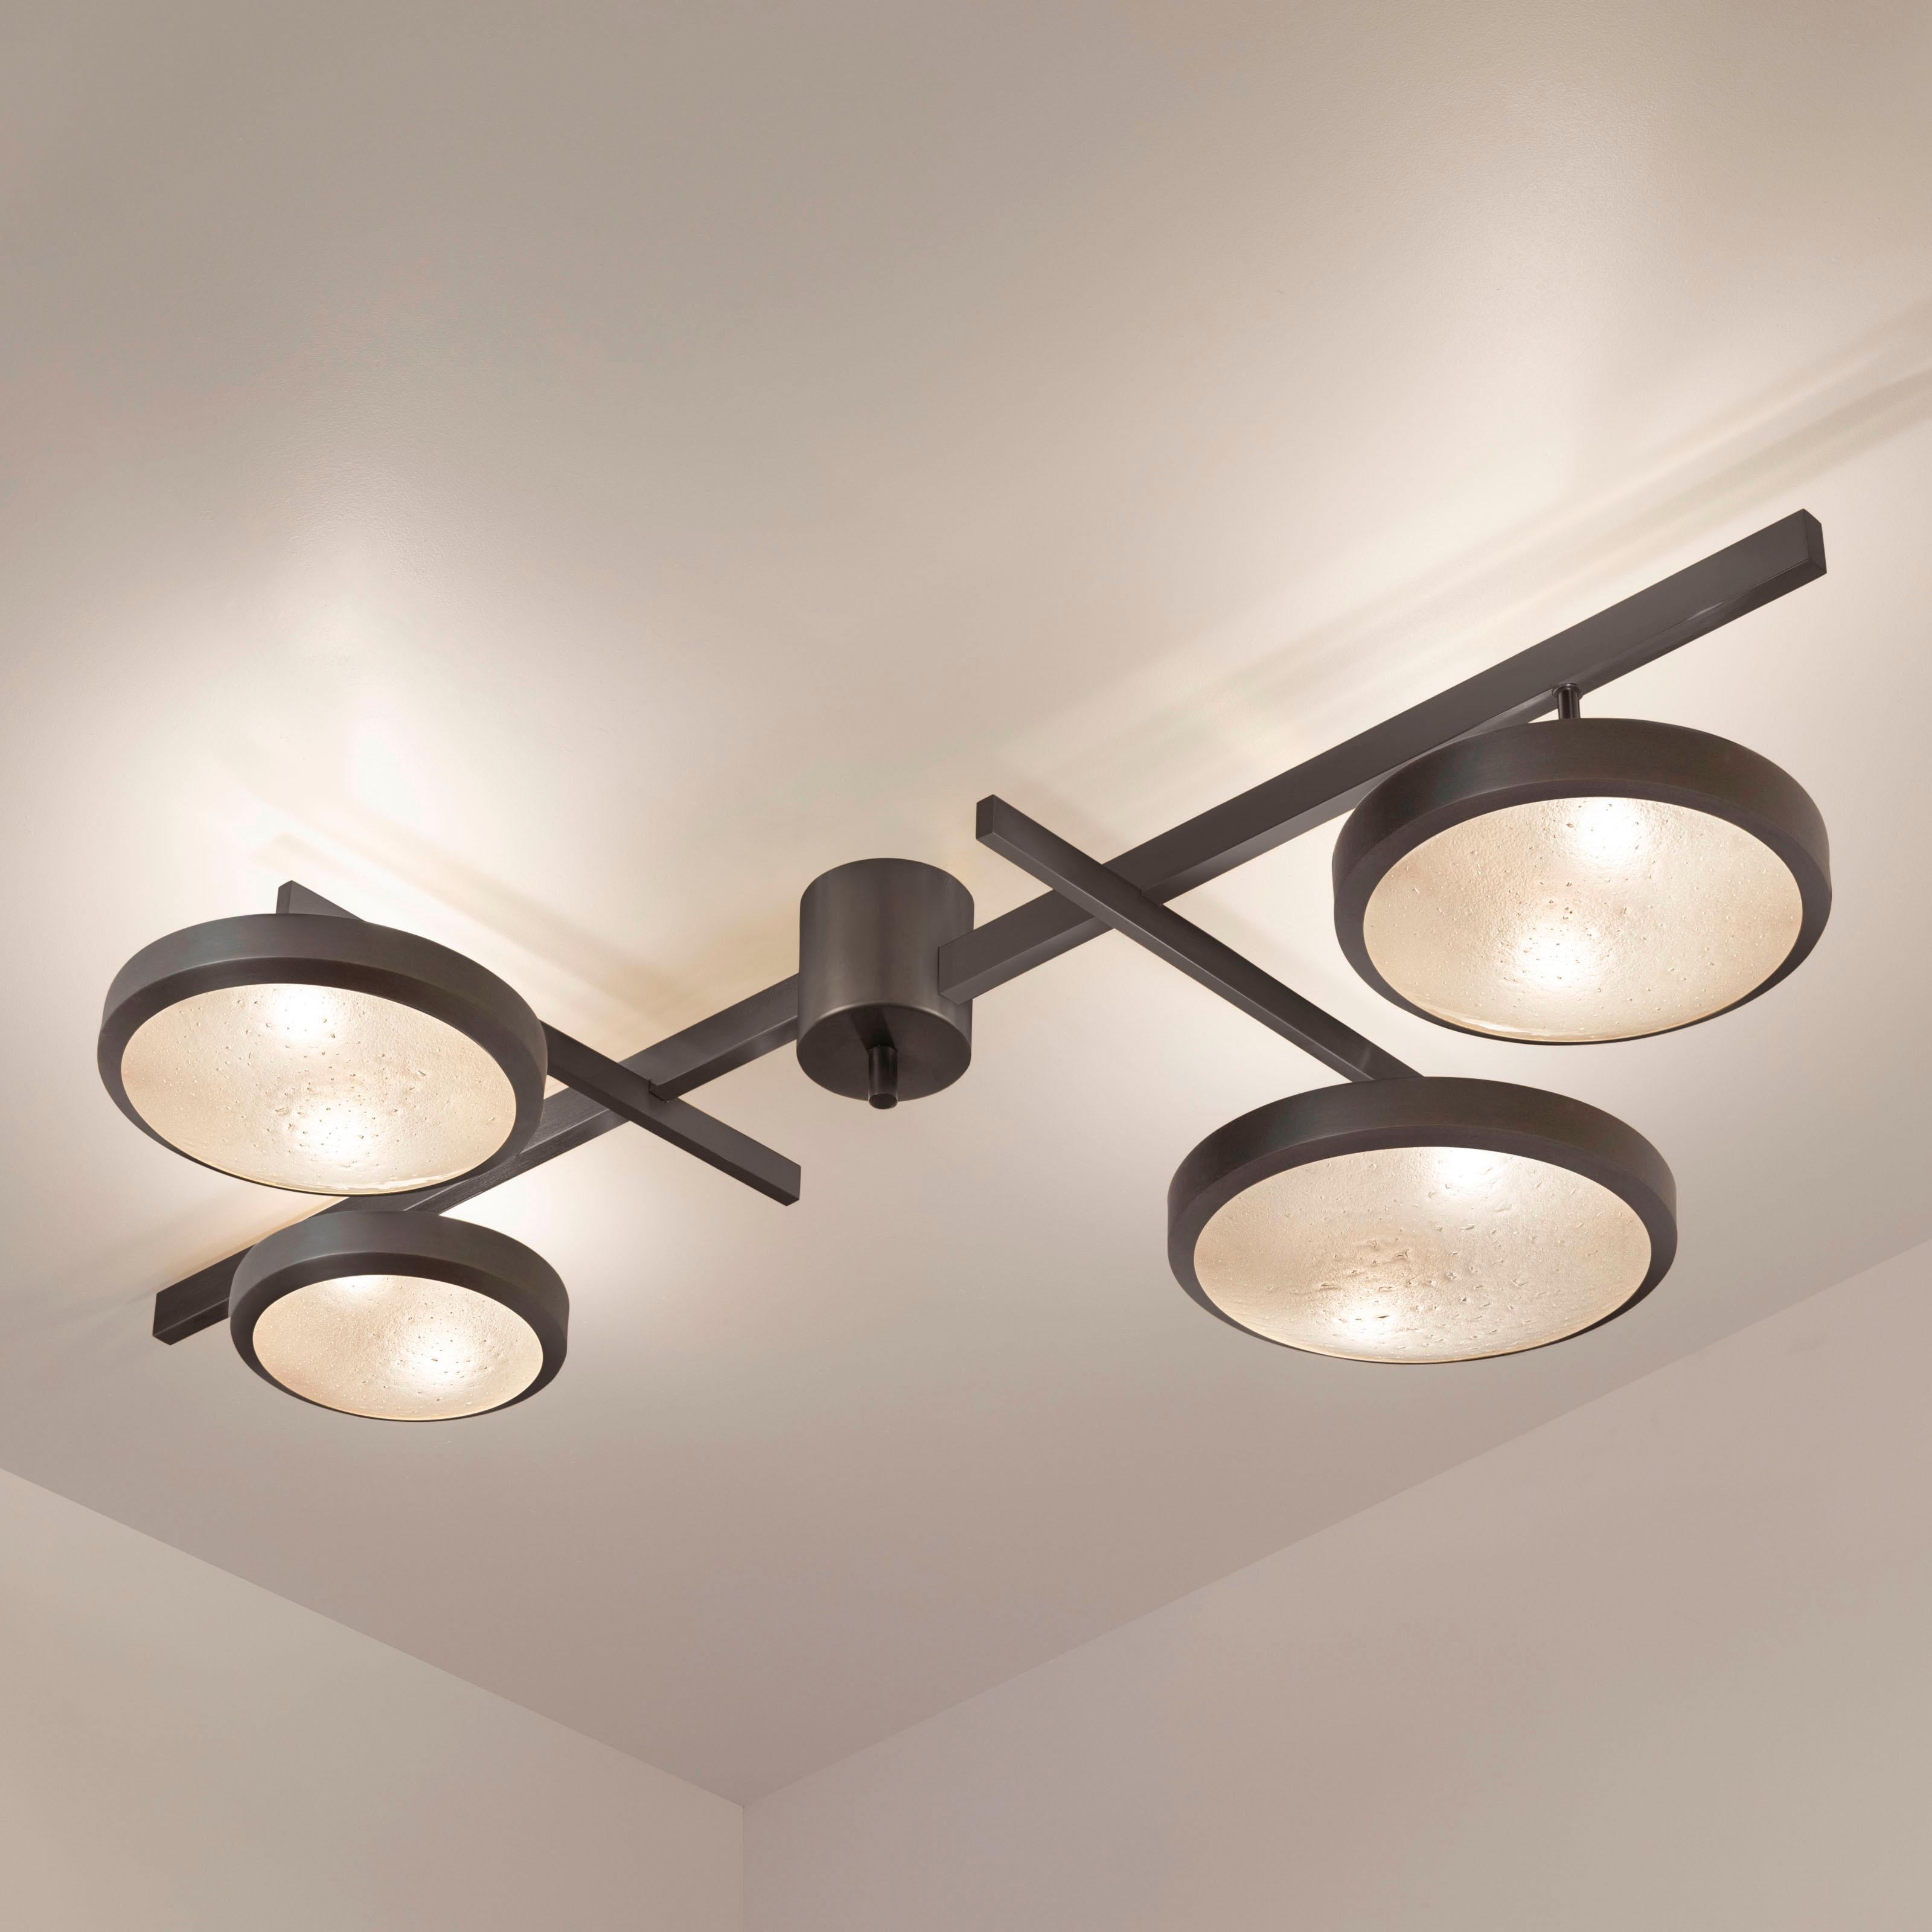 Tetrix Ceiling Light by Gaspare Asaro - Satin Nickel Finish In New Condition For Sale In New York, NY